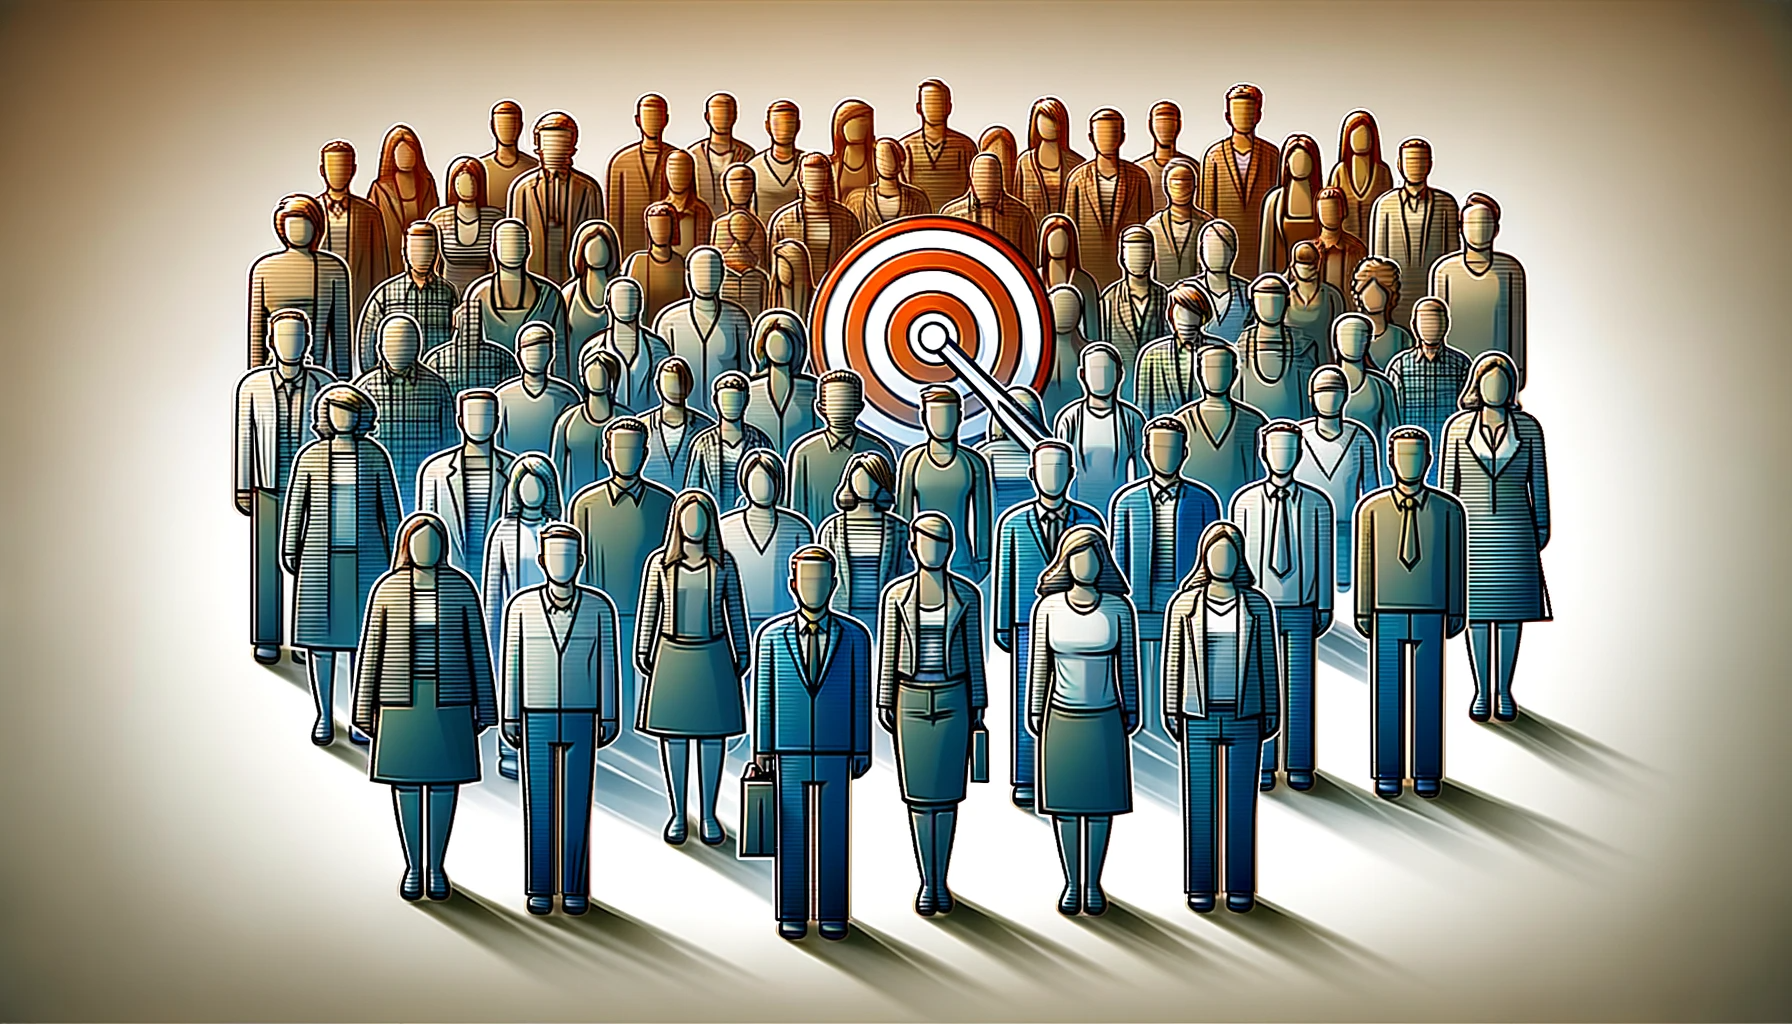 Identifying Your Target Audience
